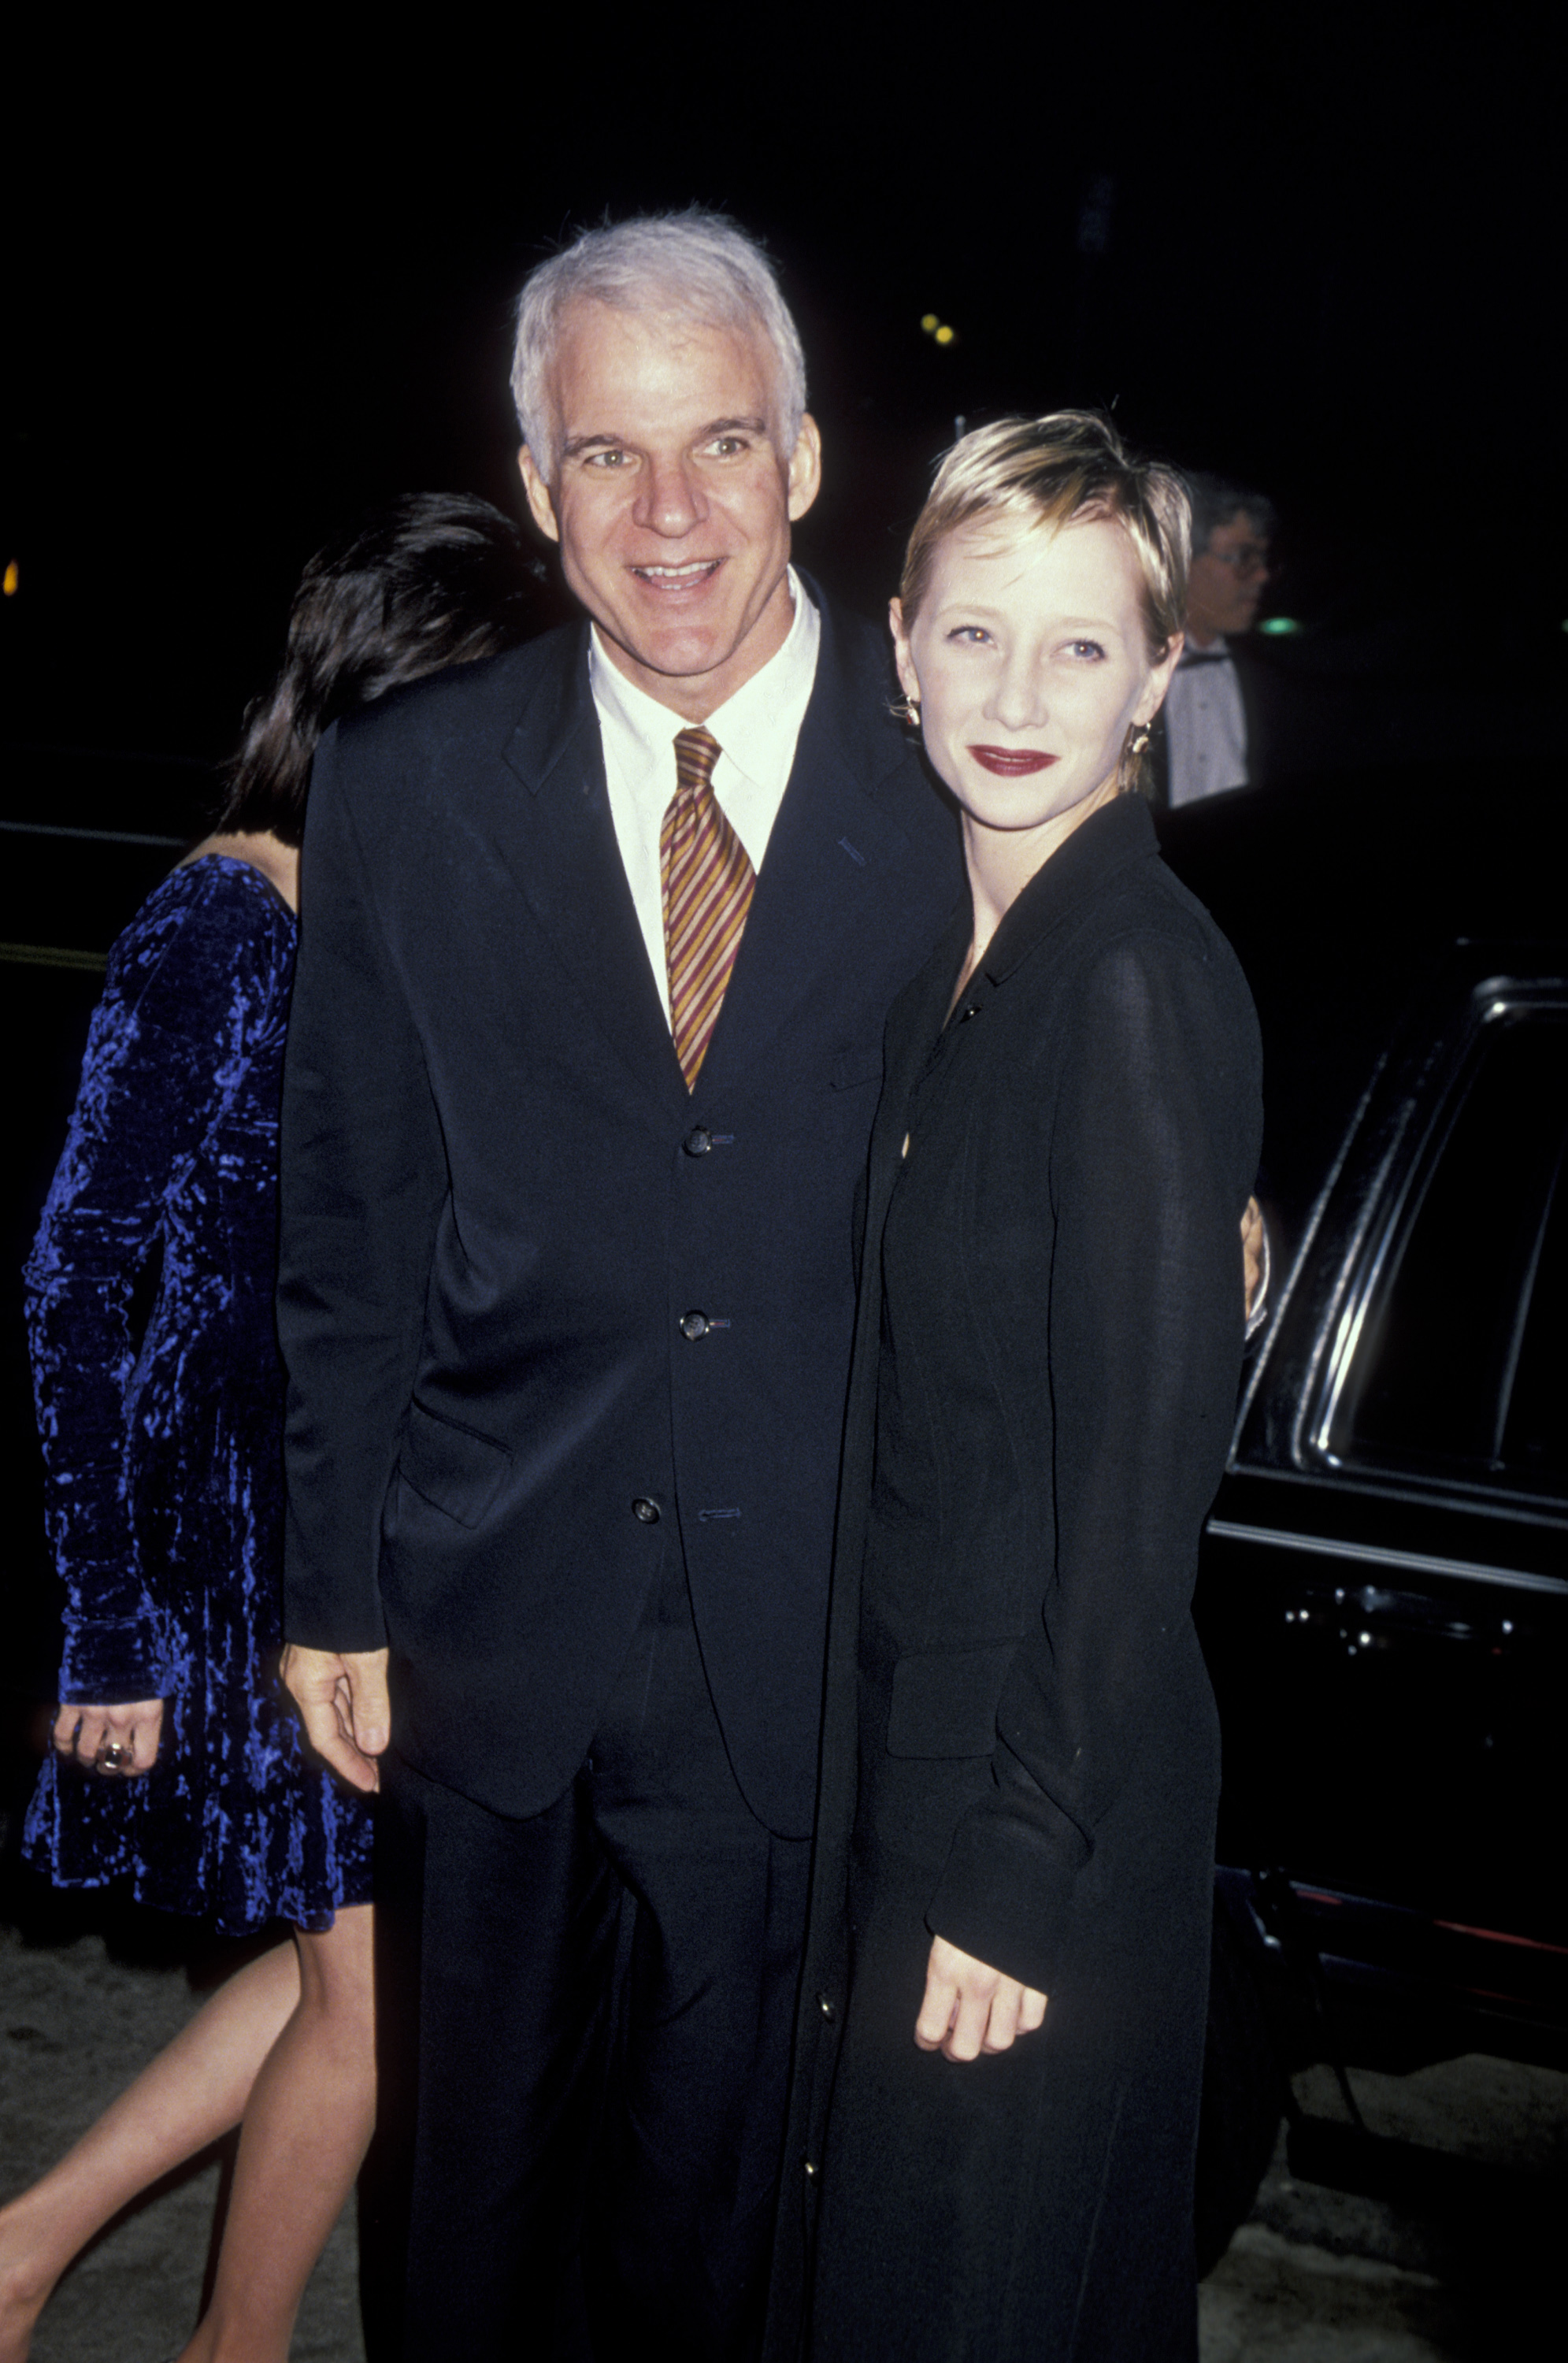 Steve Martin and Anne Heche during opening night of Steve Martin's Play "Picasso at Lapin Agile" on October 22, 1994, at Westwood Playhouse in Westwood, California, United States. | Source: Getty Images